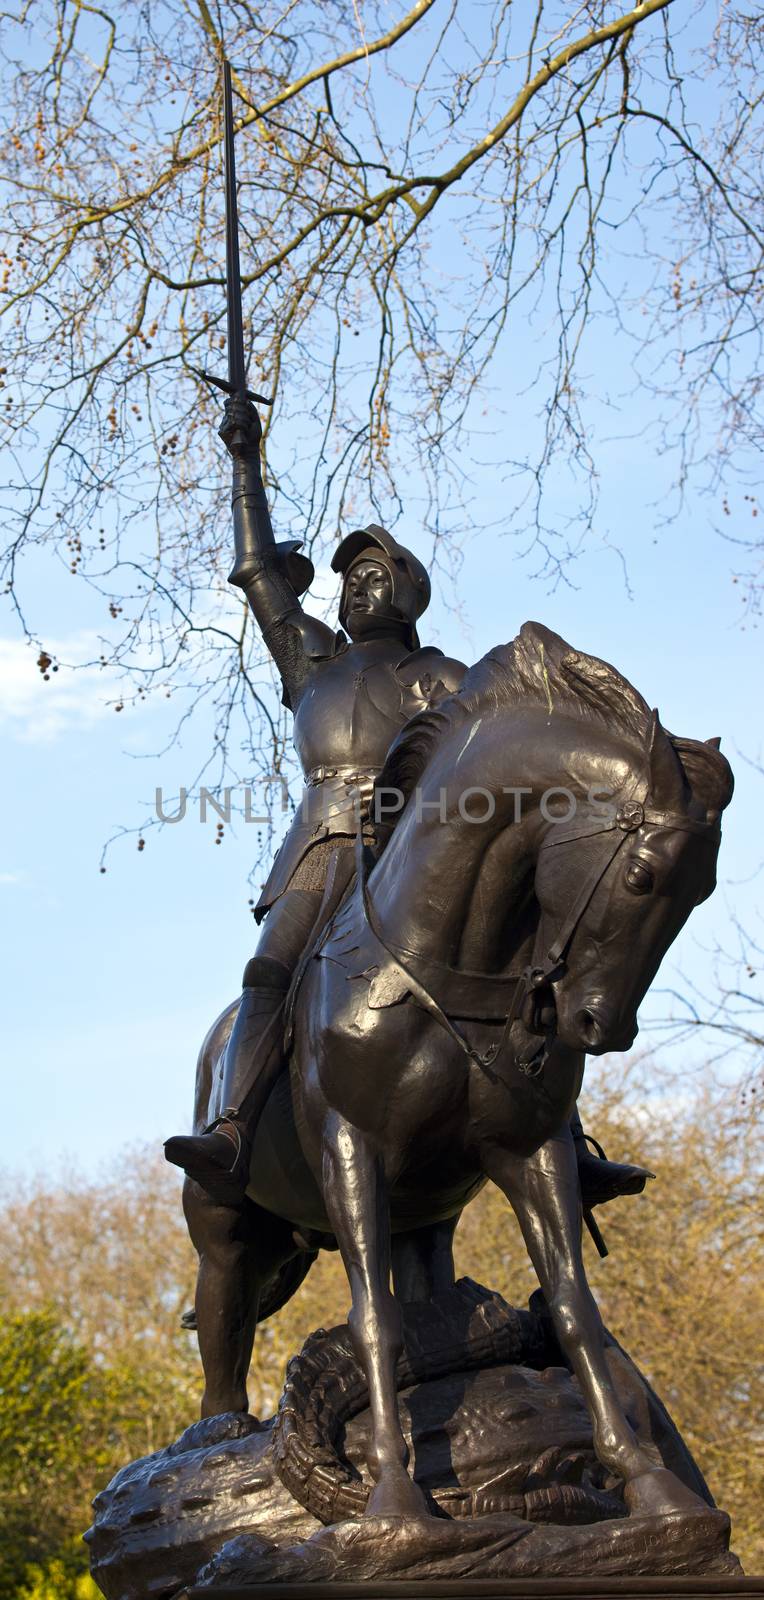 The magnificent Cavalry Memorial statue in Hyde Park, London.